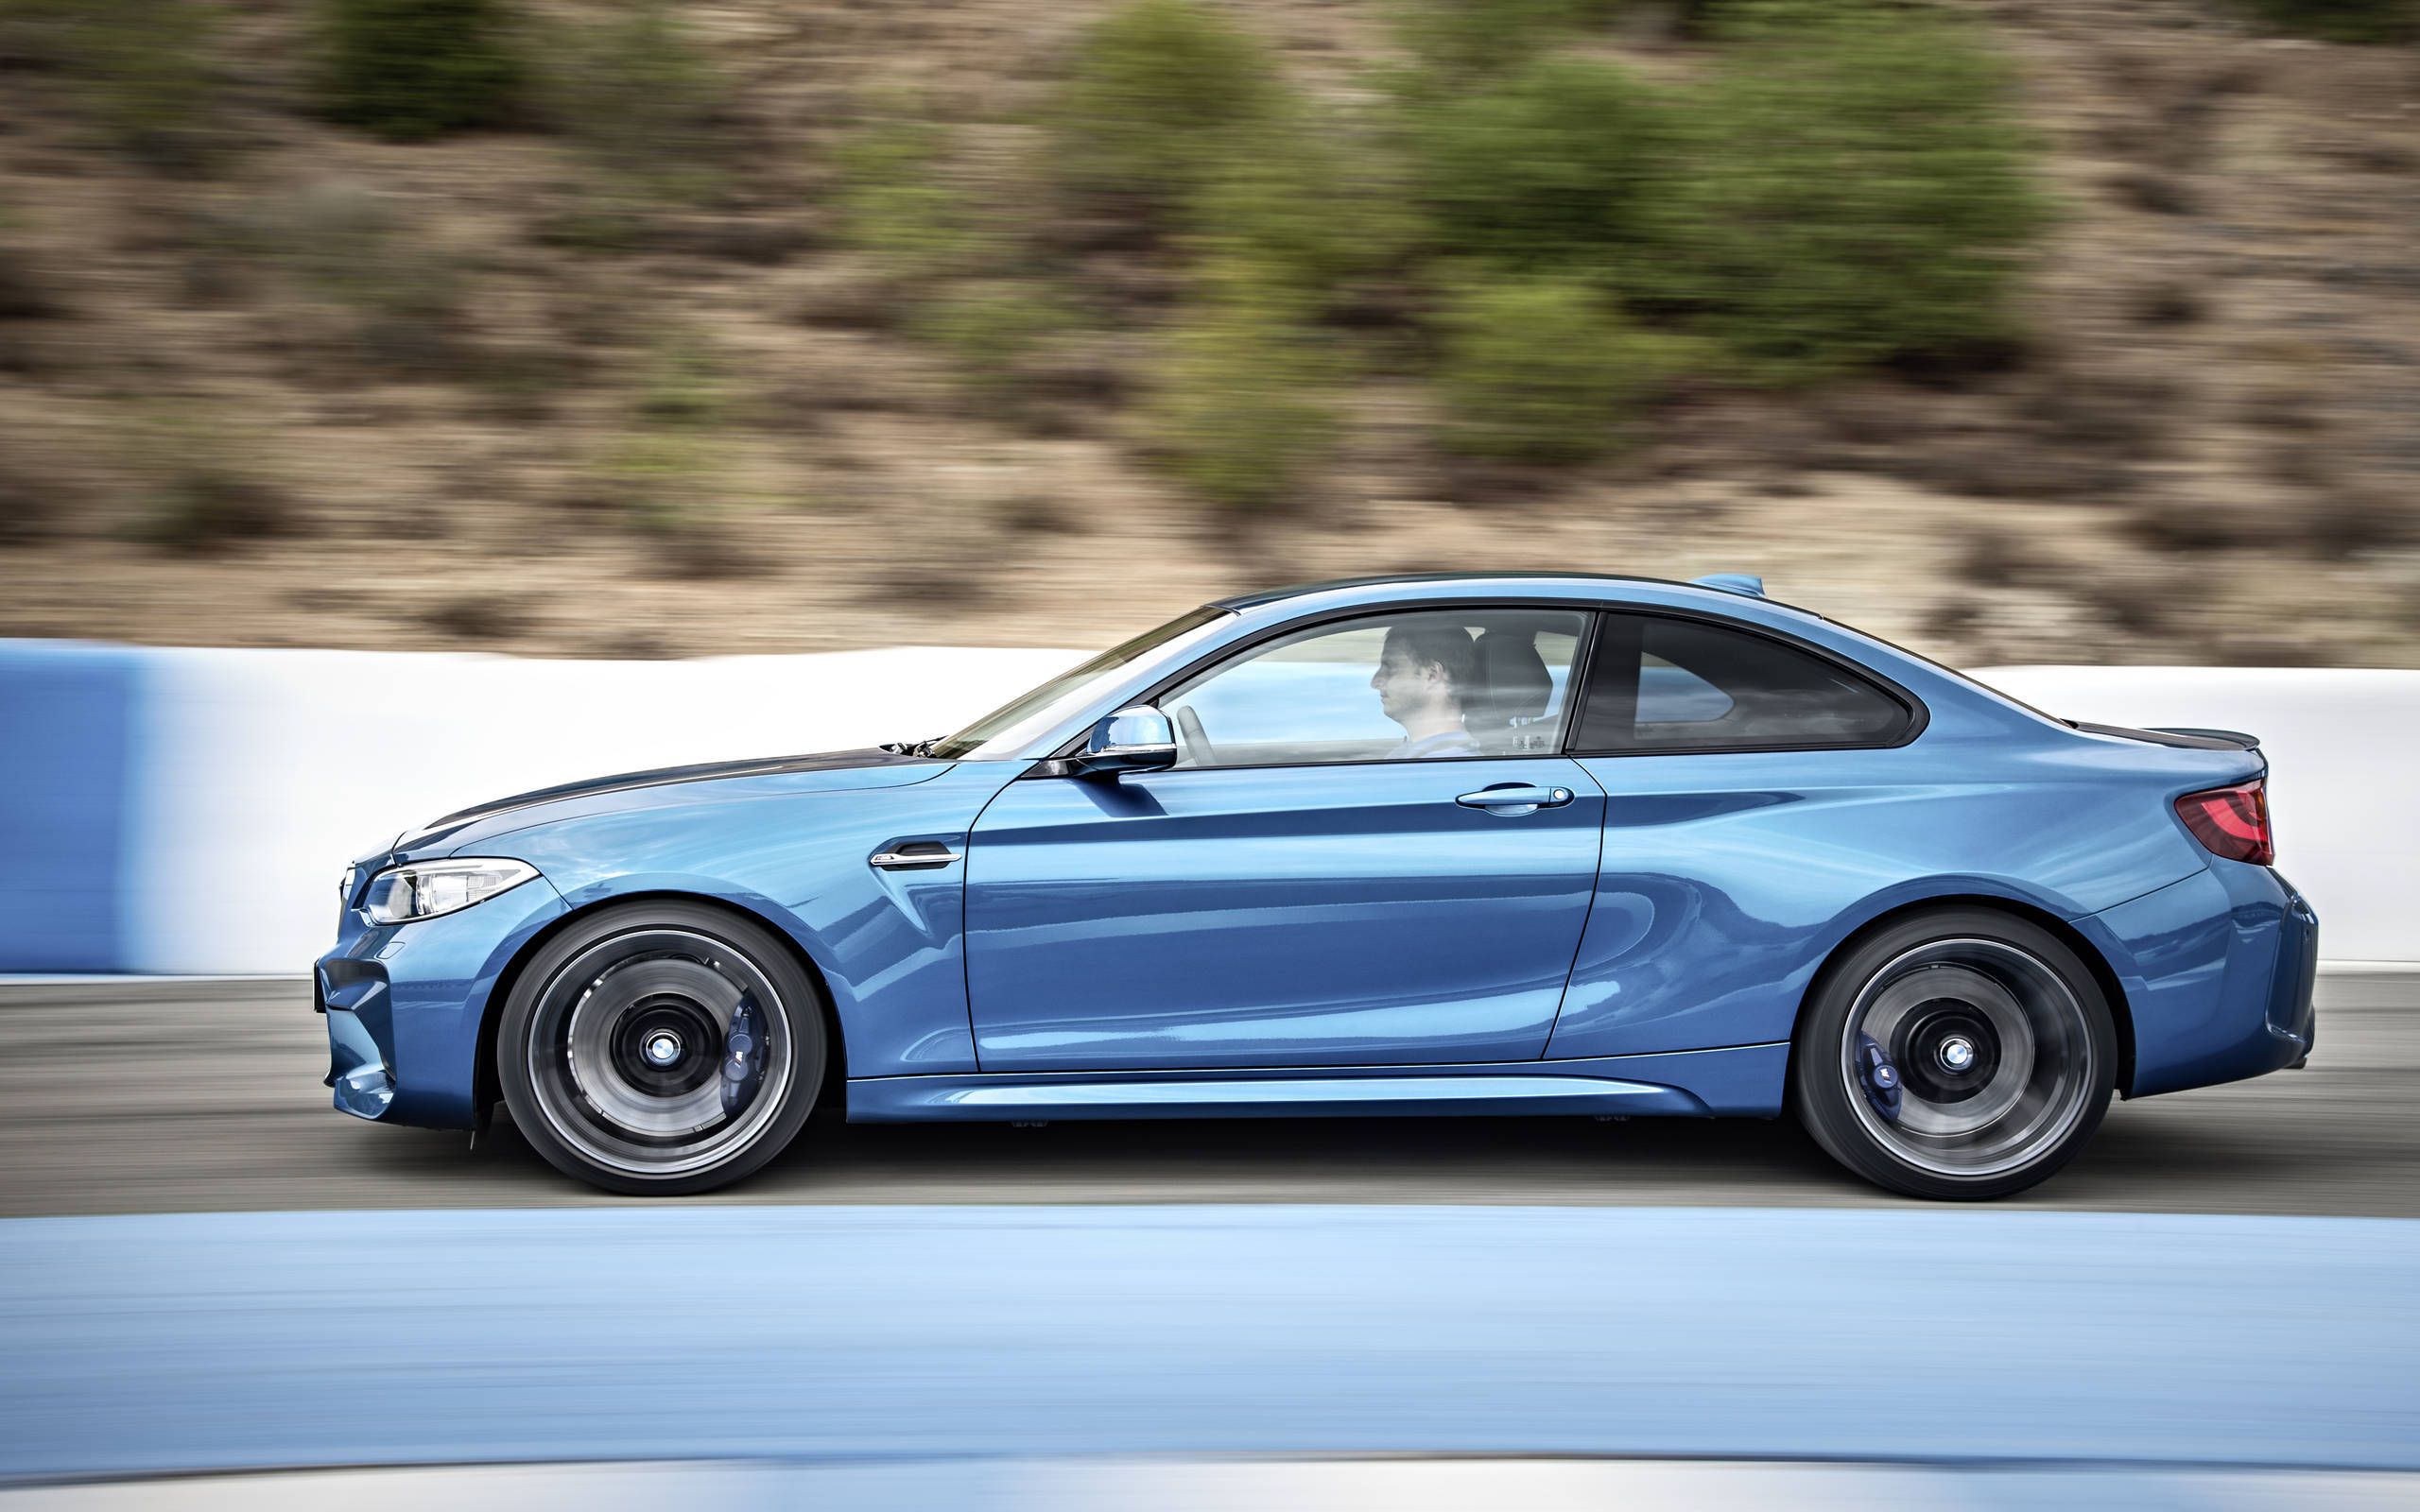 BMW M2 (F87, Auto) - RSR Bookings - The Experience of a Lifetime